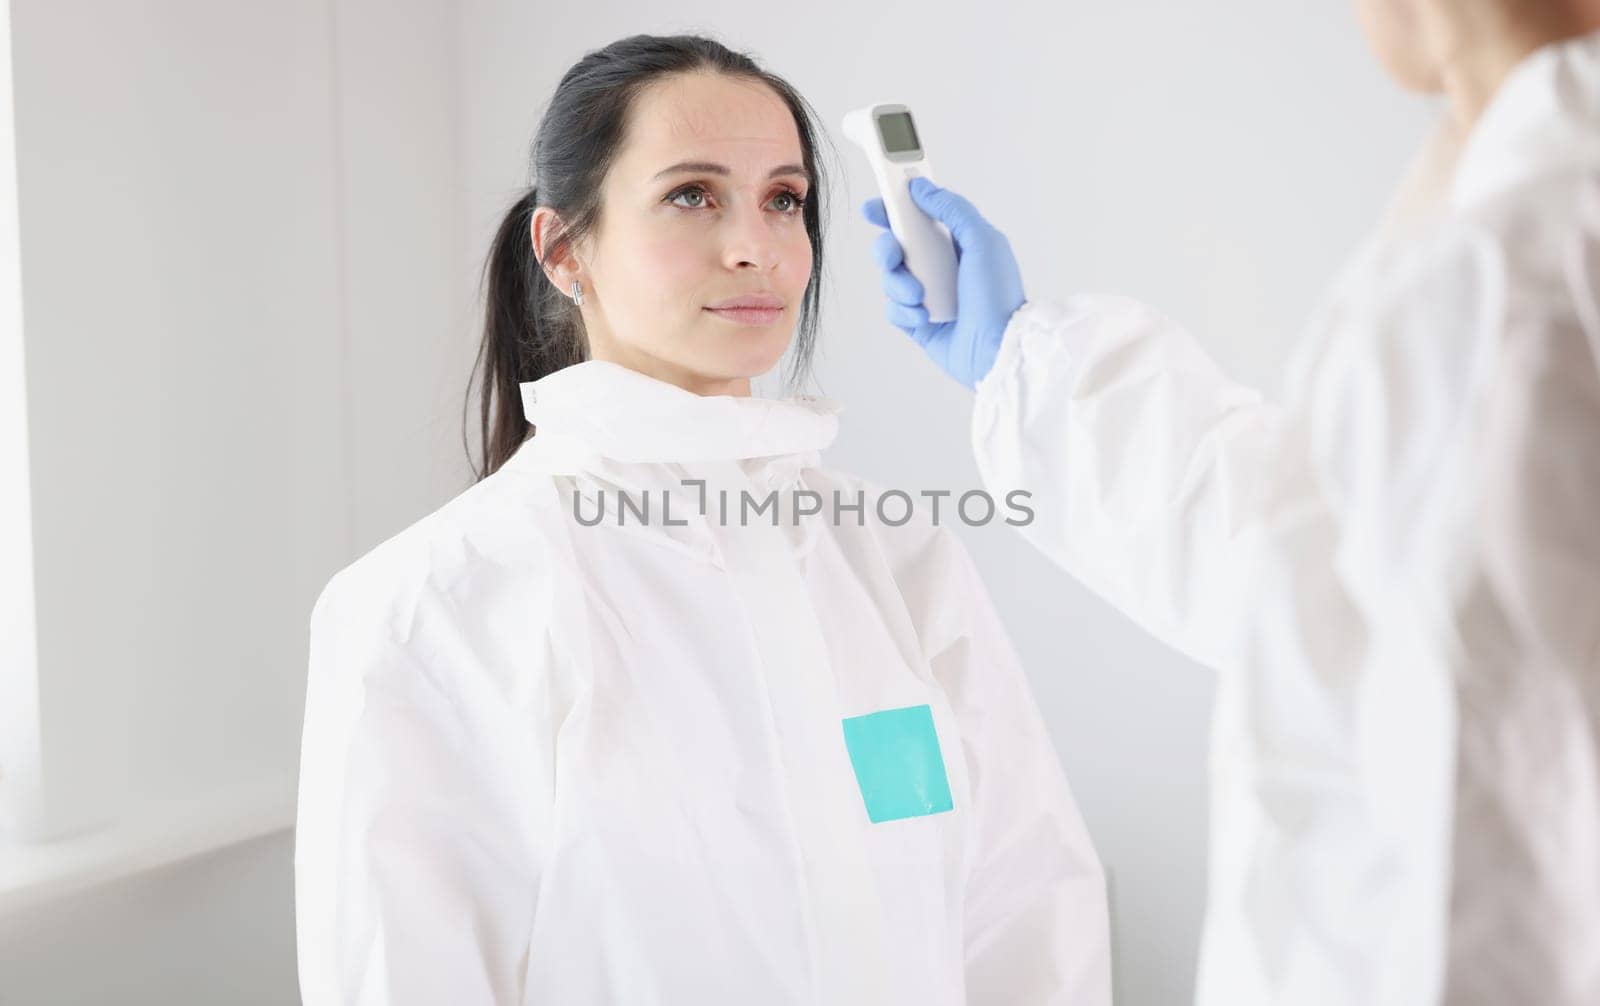 For doctor in protective suit, body temperature is measured with thermometer after work shift by kuprevich